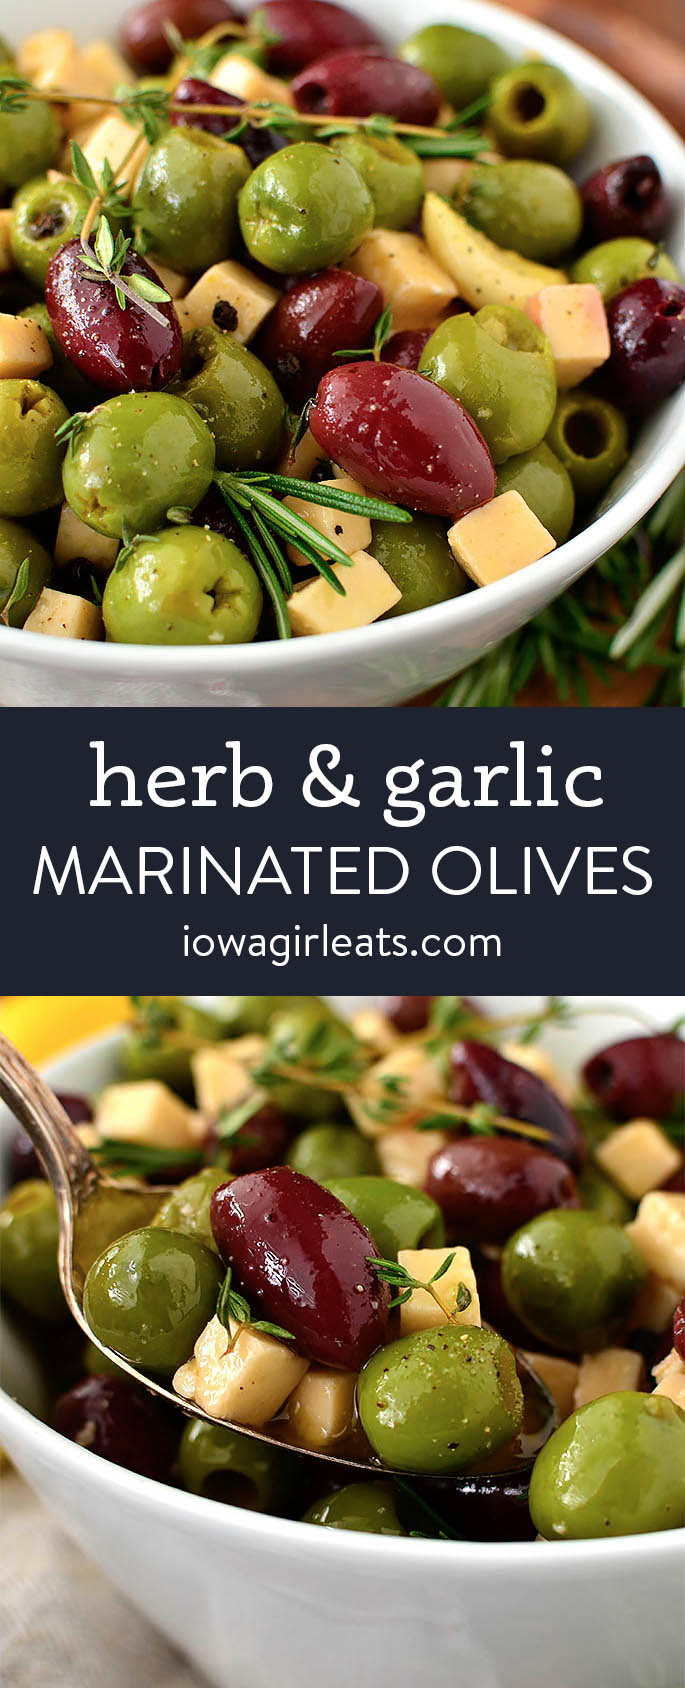 Photo collage of herb and garlic marinated olives